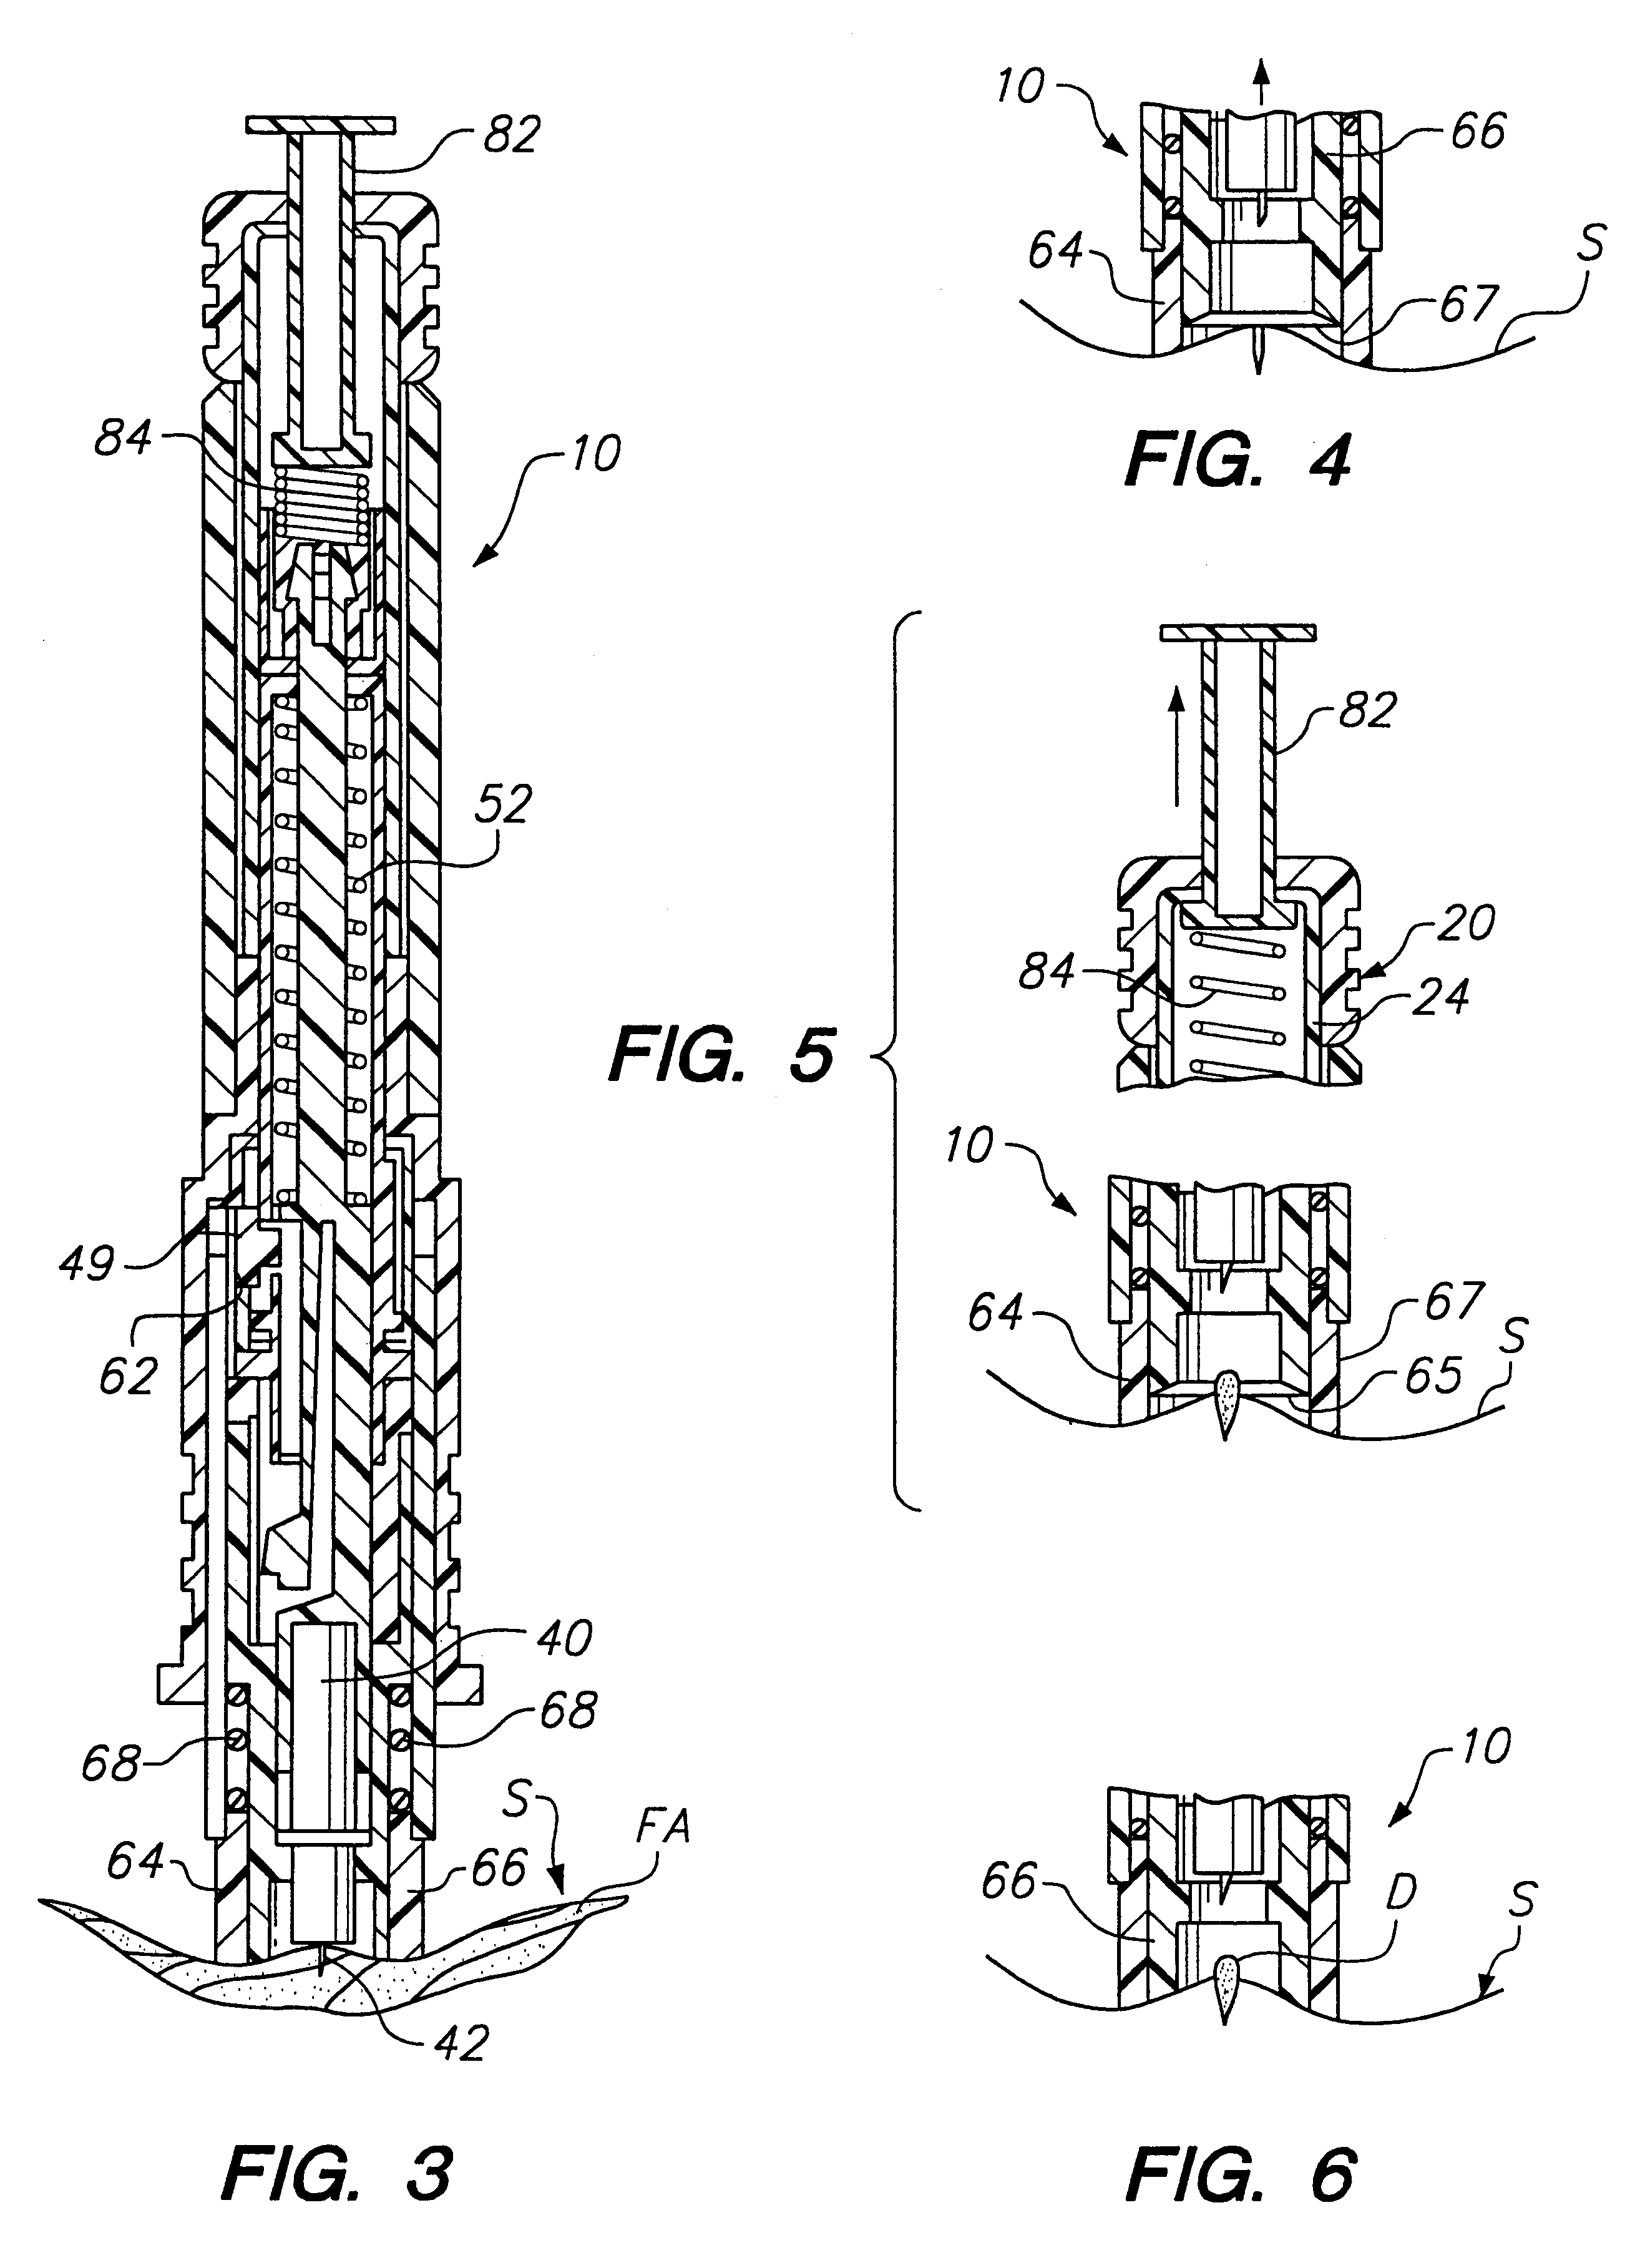 Apparatus for suctioning and pumping body fluid from an incision